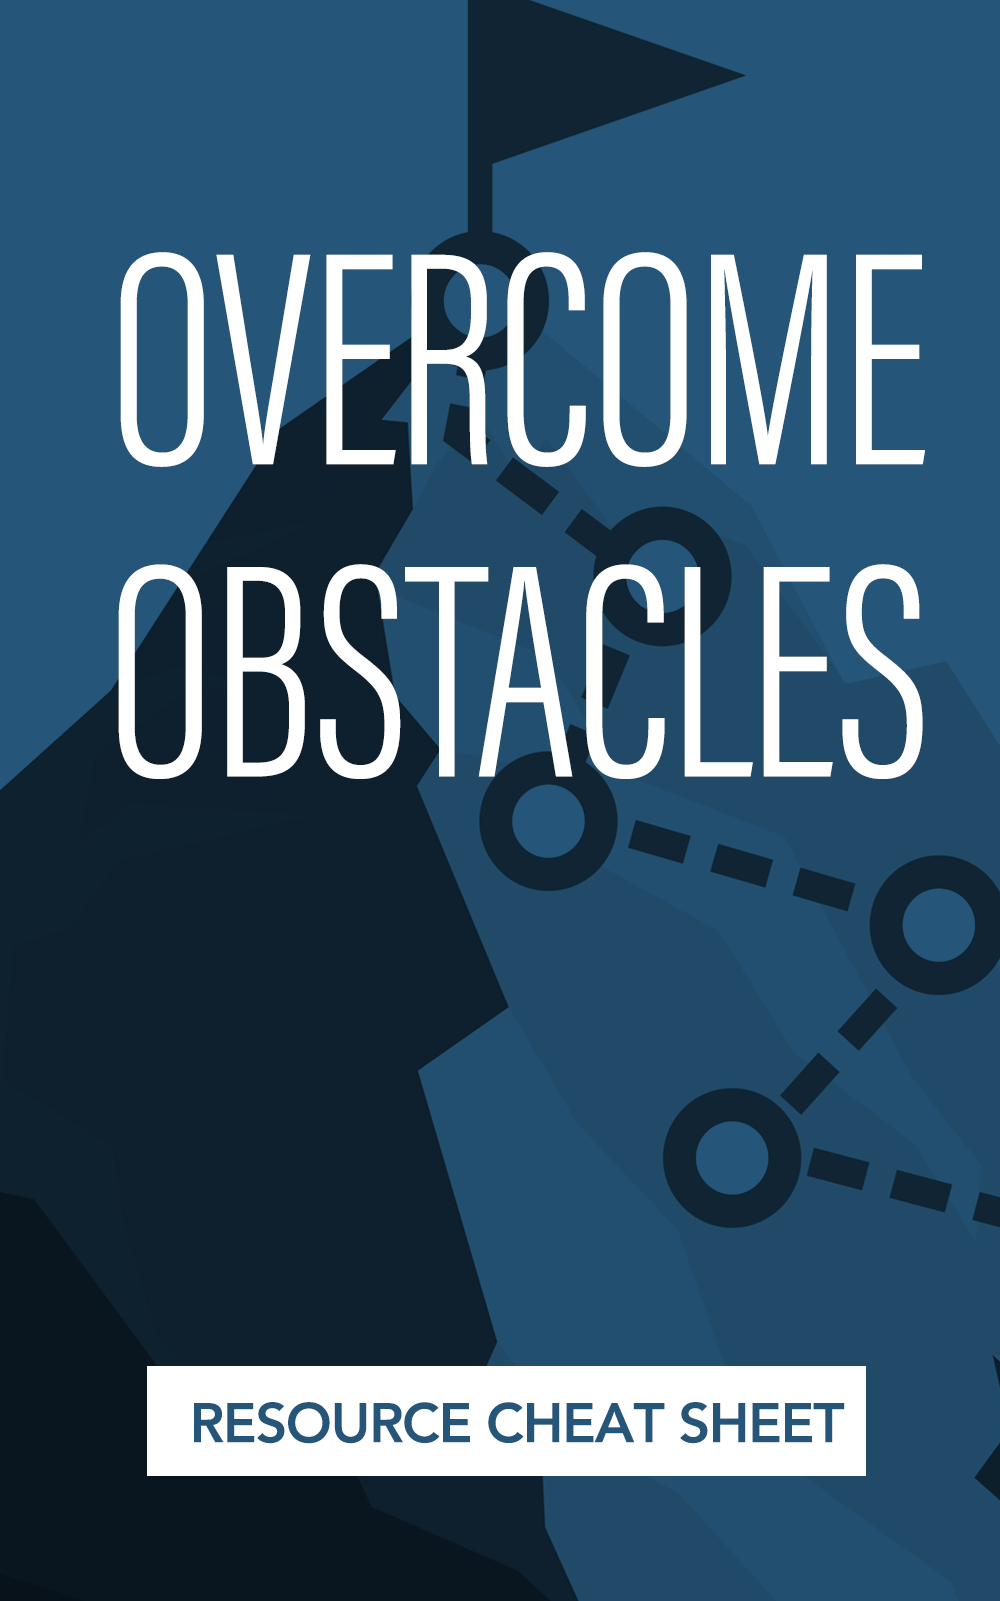 How to Overcome Obstacles and Transform Them Into Success - Download Delight